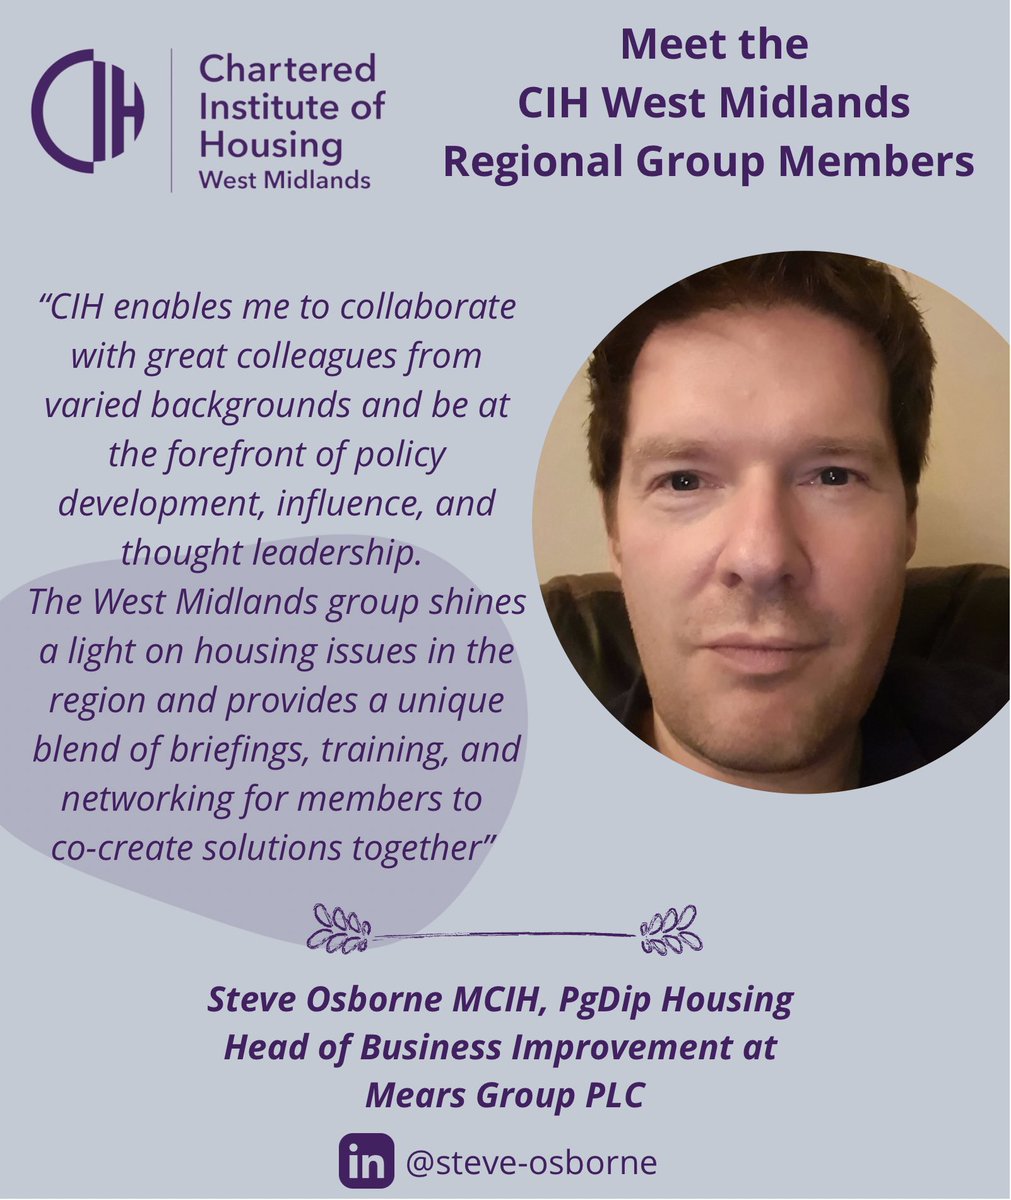 🔴 Featured Regional Member 🔴 Hope you all had a lovely weekend! Here at @CIHWestMidlands HQ, we have been busy preparing for our next featured CIH West Midlands Regional Member Please say hi 👋🏻 to Steve Osborne, Head of Business Improvement at @mearsgroup